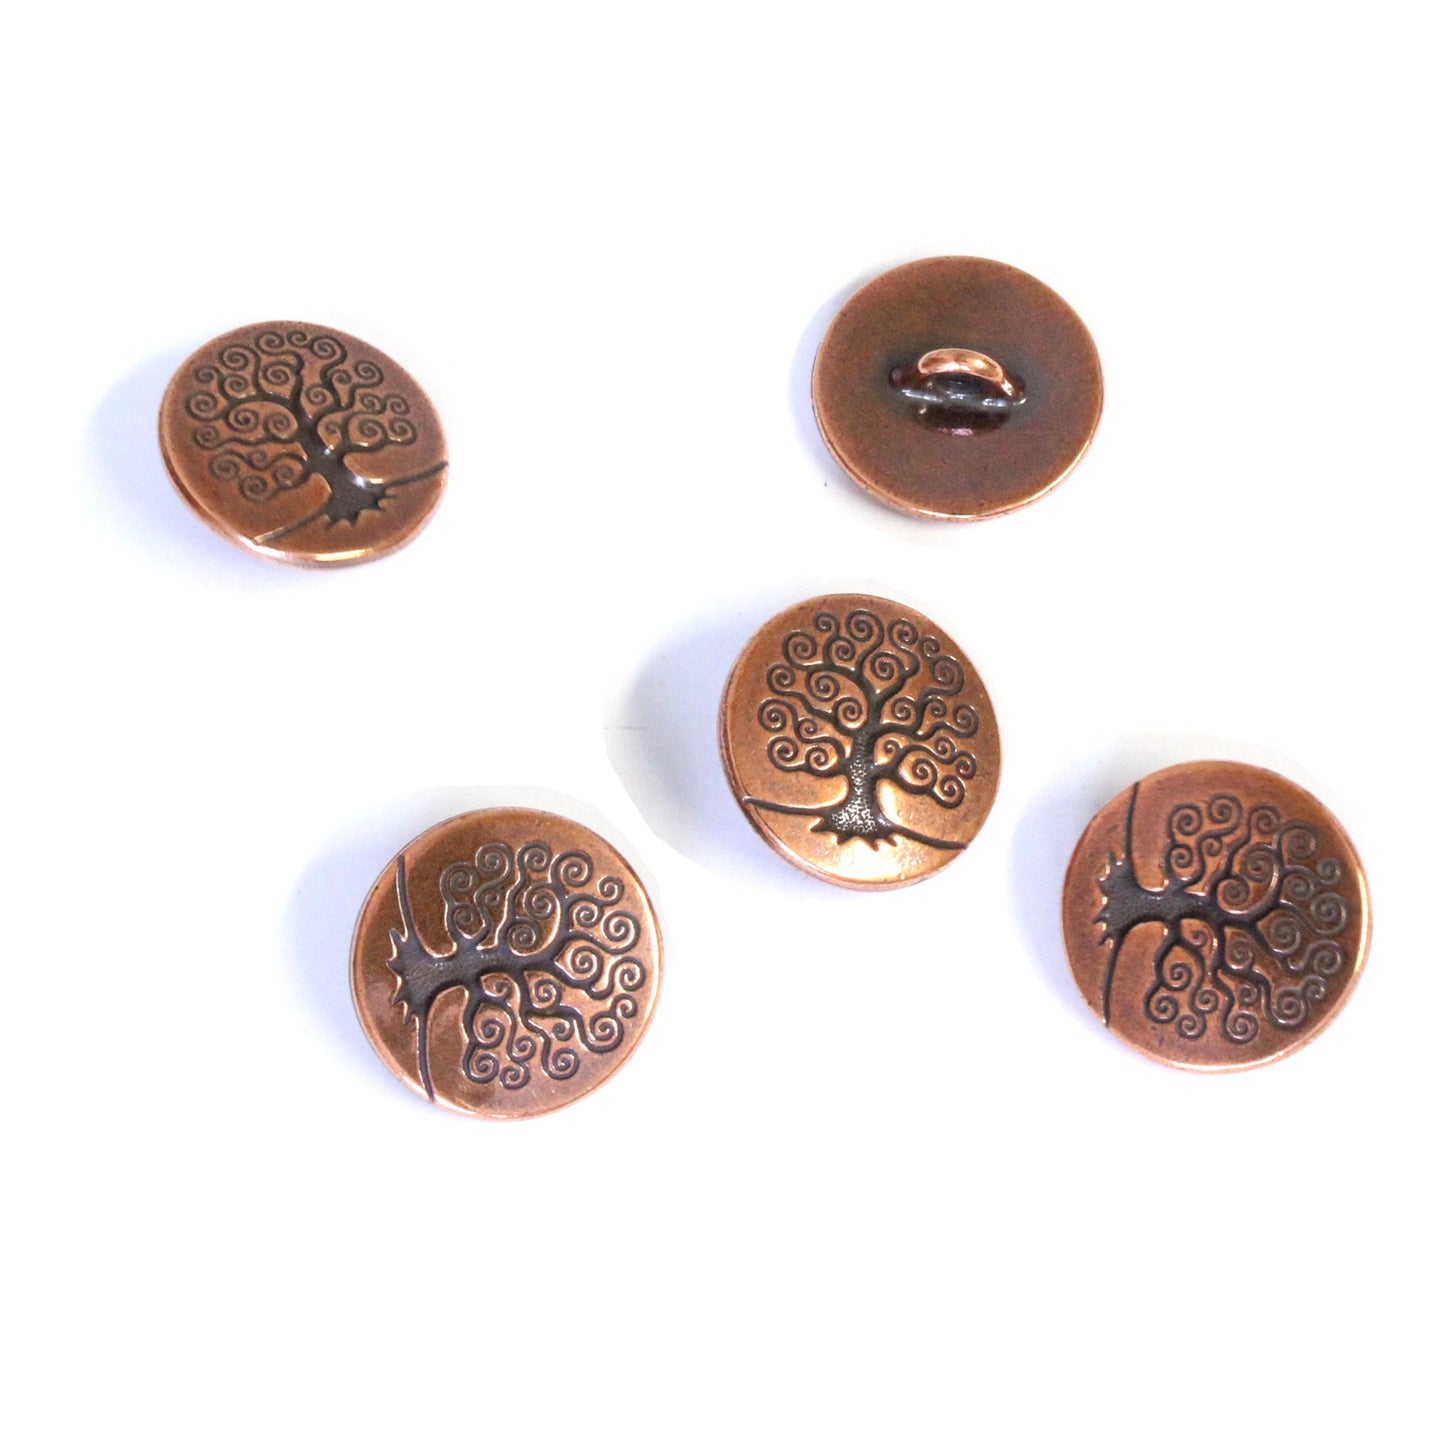 TierraCast Tree of Life Button / pewter with antique copper finish  / 94-6562-18